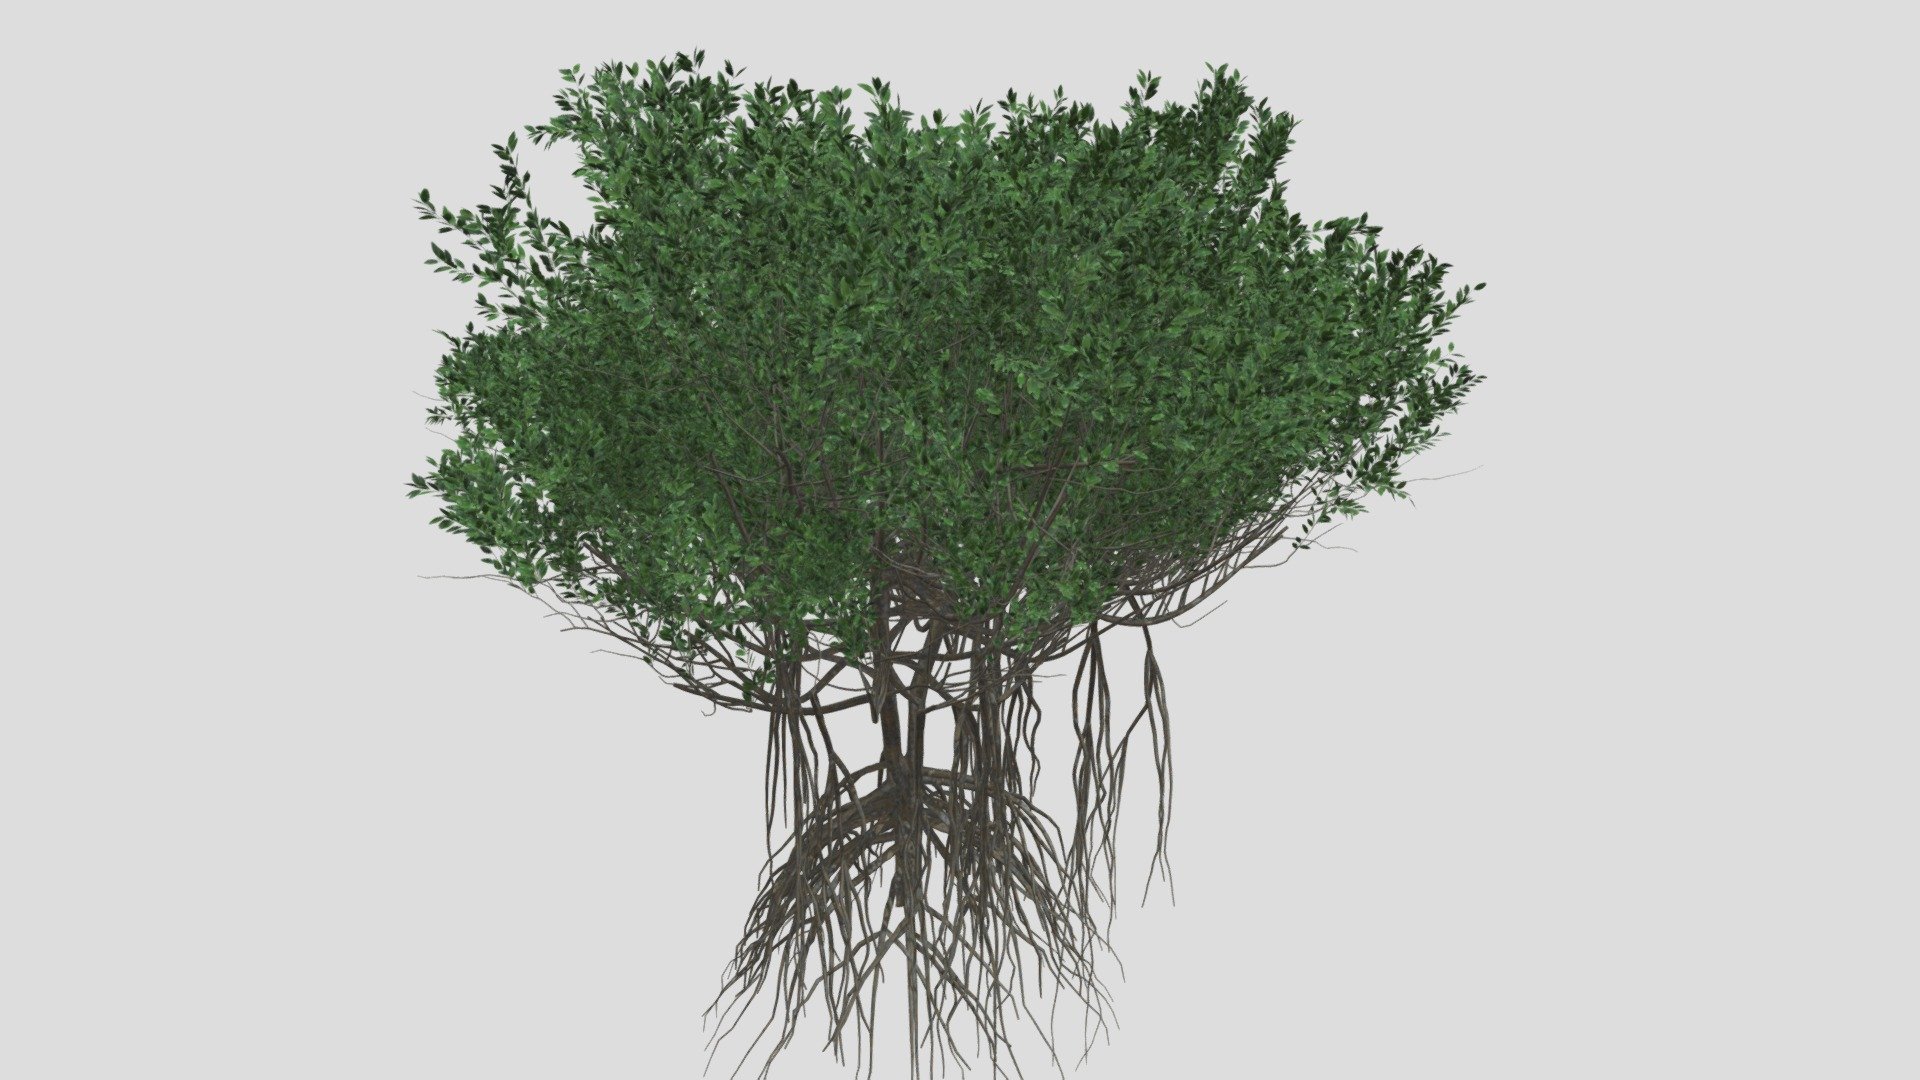 GOBOTREE

A high quality 3d model of a mangrove tree A (Rhizophora mangle).

| Model dimensions : 7.11m7.12m7.08m

| Mesh details â€“ 2225628 faces , 1832498 vertices

| It comes with PBR ready textures - Diffuse, Albedo, AO, Metalness /Specular, Normal, Roughness maps. Other formats available upon request.

| Formats 3ds max 2015 with a Vray materials FBX OBJ

Object suitable for architectural and landscape visualisations and presentations. Please let us know, if we can improve our models or if you need us to adapt to specific needs!

We take custom orders for specific species!

Find more assets on Gobotree.com! - GTV mangrove tree A - Buy Royalty Free 3D model by Gobotree-3D-Assets 3d model